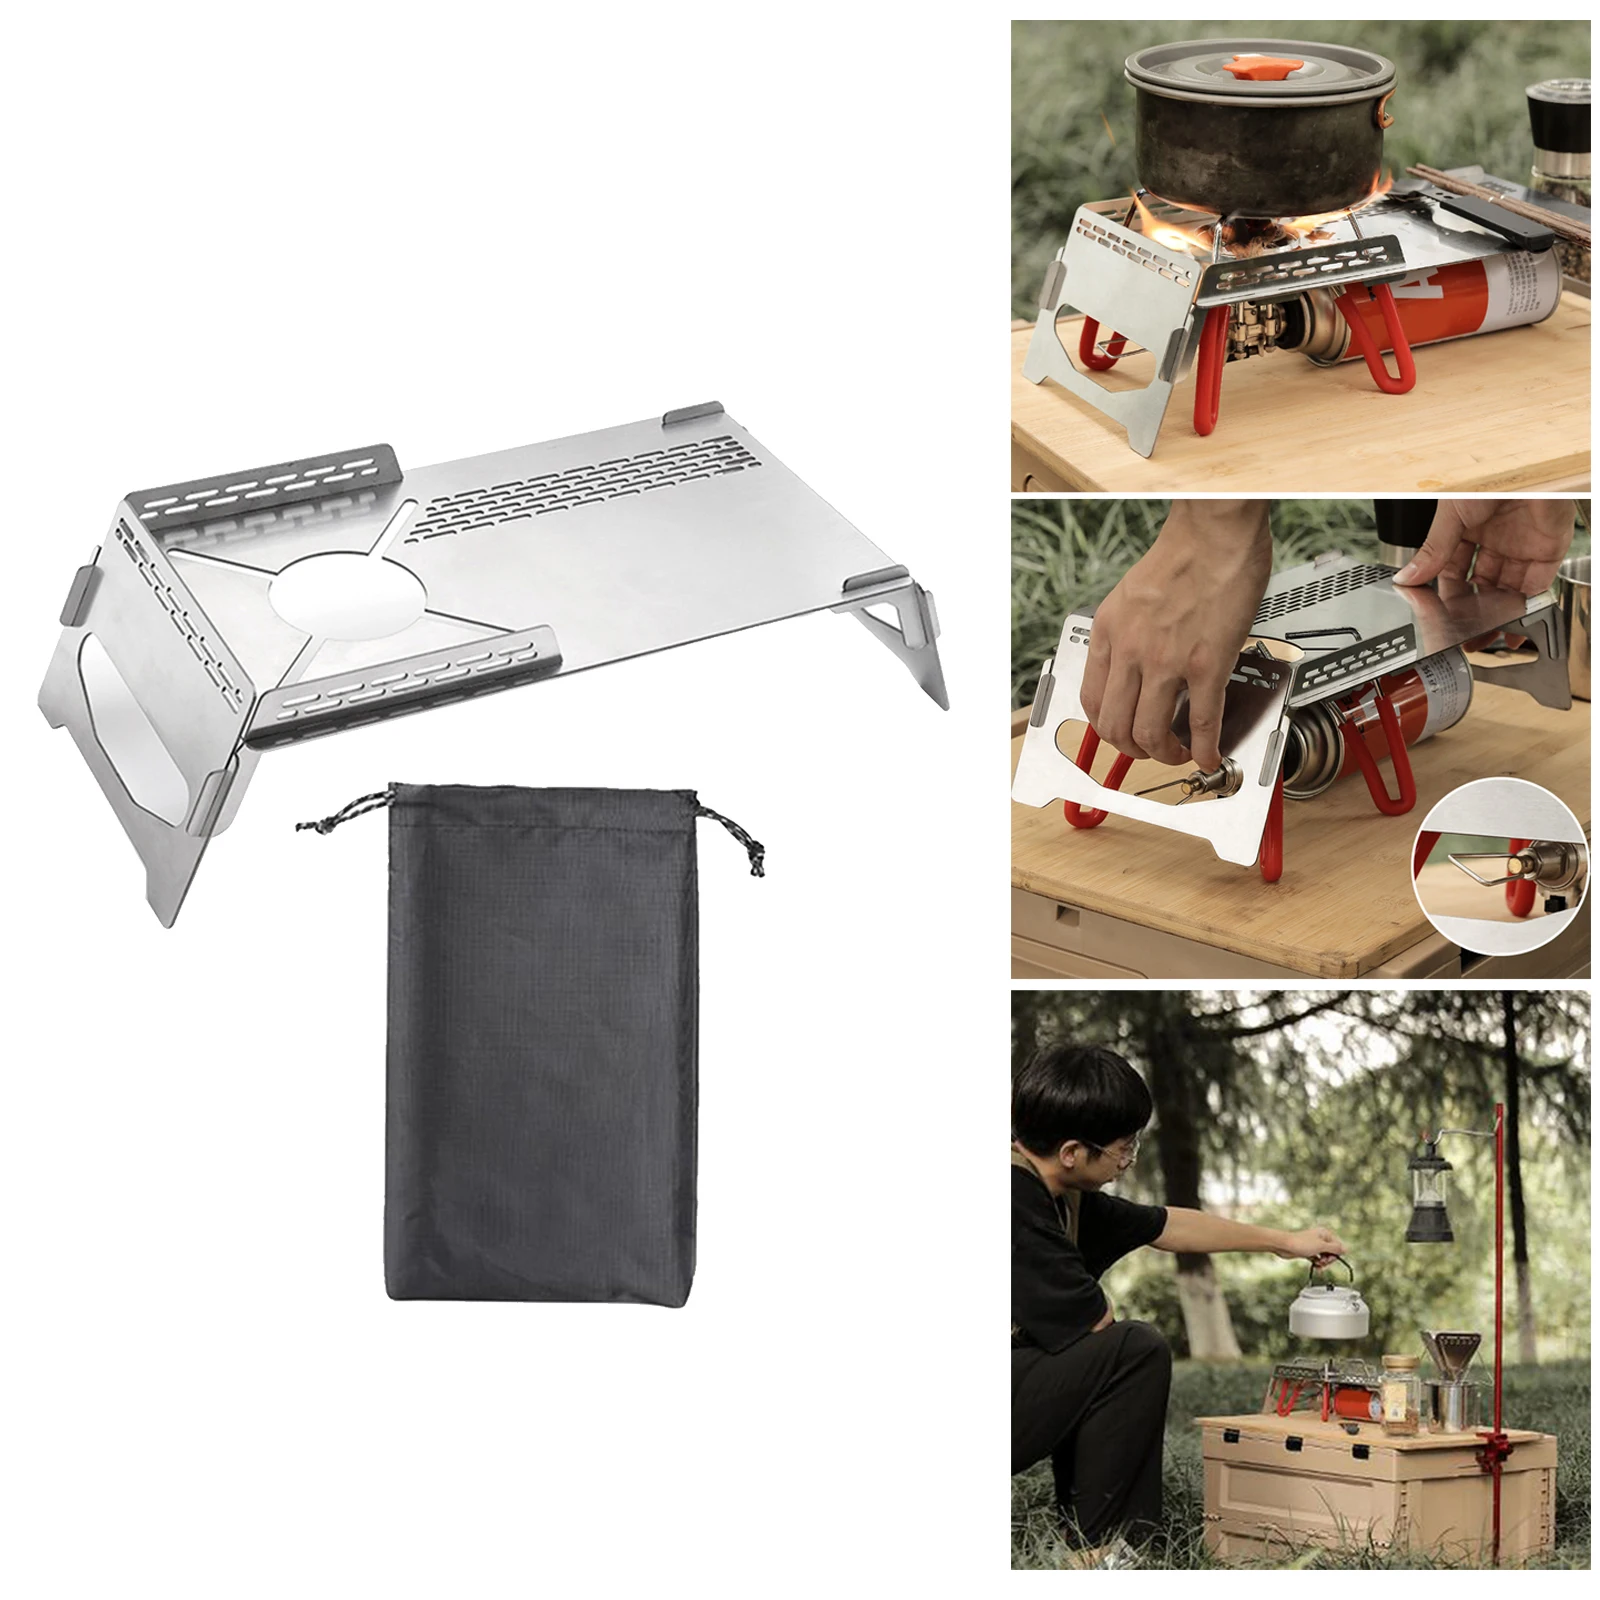 Outdoor Foldable Stove Table Camp Windproof Gas Stove Stand Heat Resistance Bracket Holder Desk Fishing Hiking Backpacking